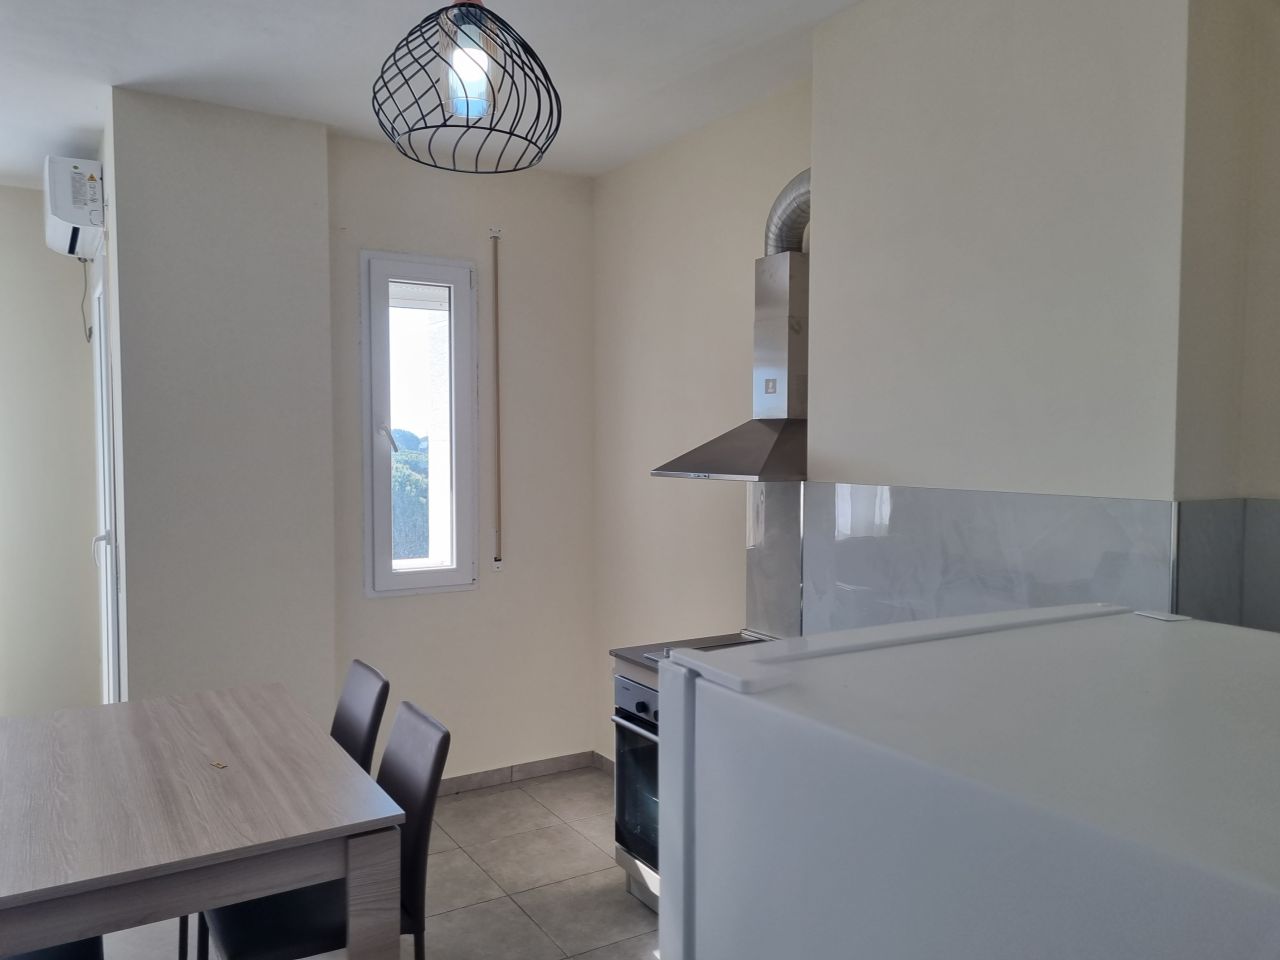 Apartments For Sale in Lalzit Bay Albania